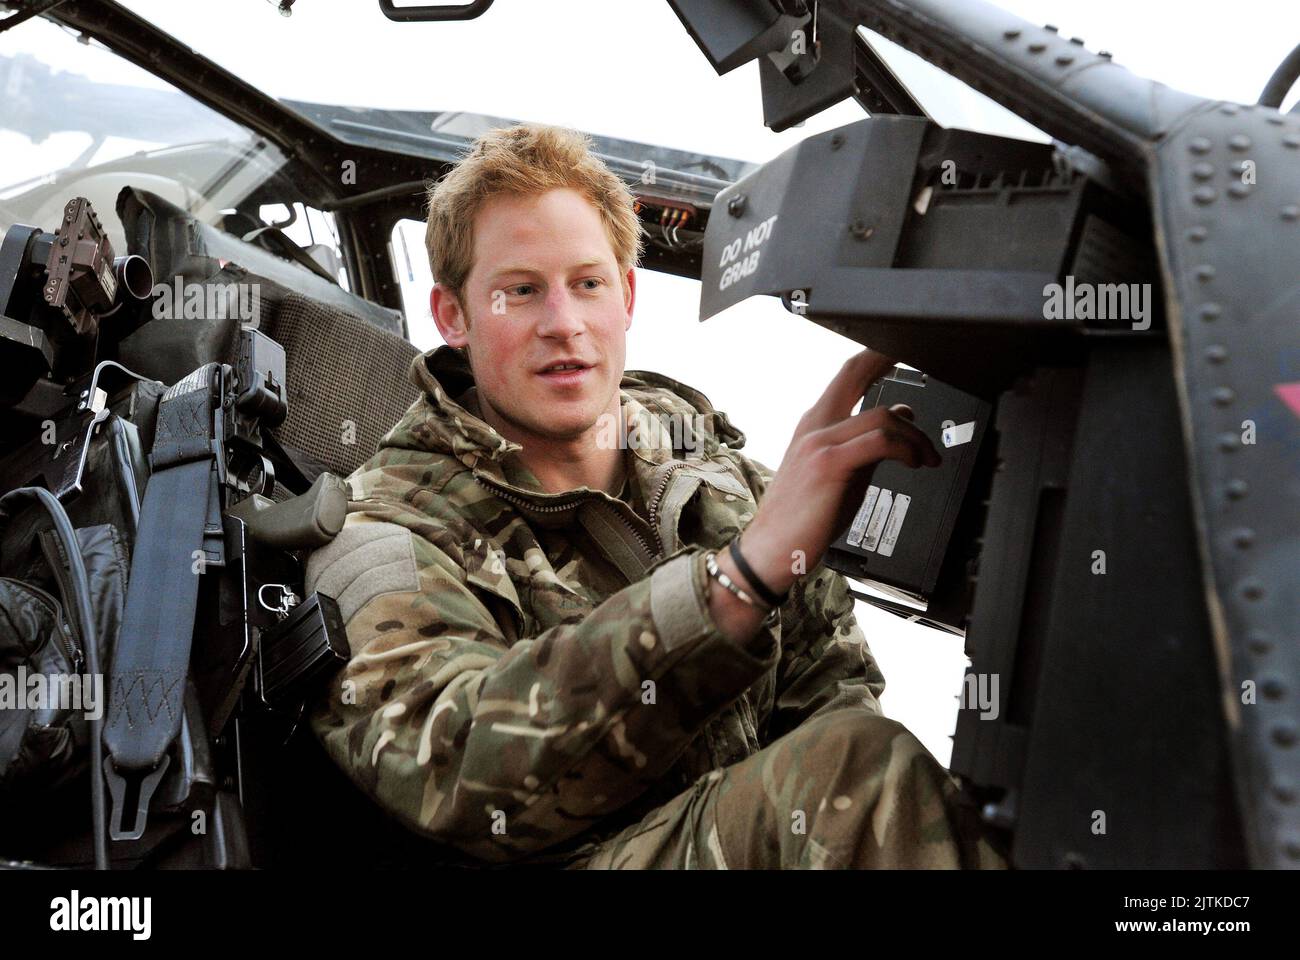 File photo dated 12/12/2012 of Prince Harry or Captain Wales as he was known in the British Army, making his early morning pre-flight checks in the cockpit, at Camp Bastion, southern Afghanistan. The Duke of Sussex has consoled Lee Spencer, a former royal marine who had to pull out of an epic Triathlon of Great Britain challenge, telling him he should be 'really proud' of his achievements. Harry video-called Lee, a single leg amputee, who was left devastated when forced, due to injury, to end his bid to swim the English Channel, cycle from Lands End to John O'Groats and climb the three highest Stock Photo